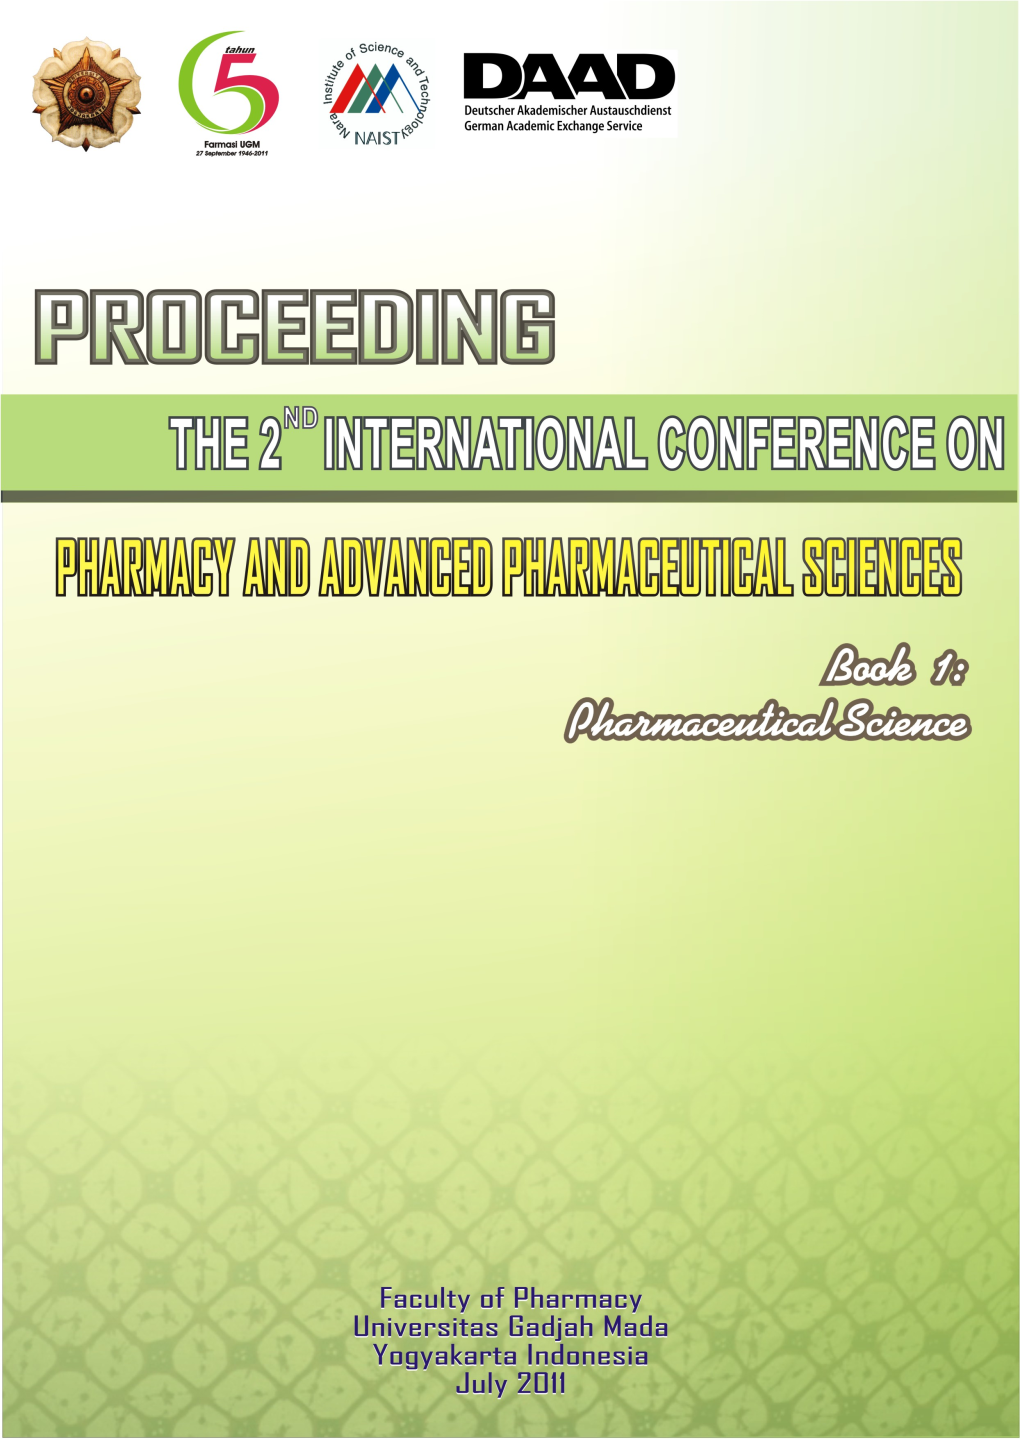 The 2Nd Pharmacy and Advanced Pharmaceutical Science